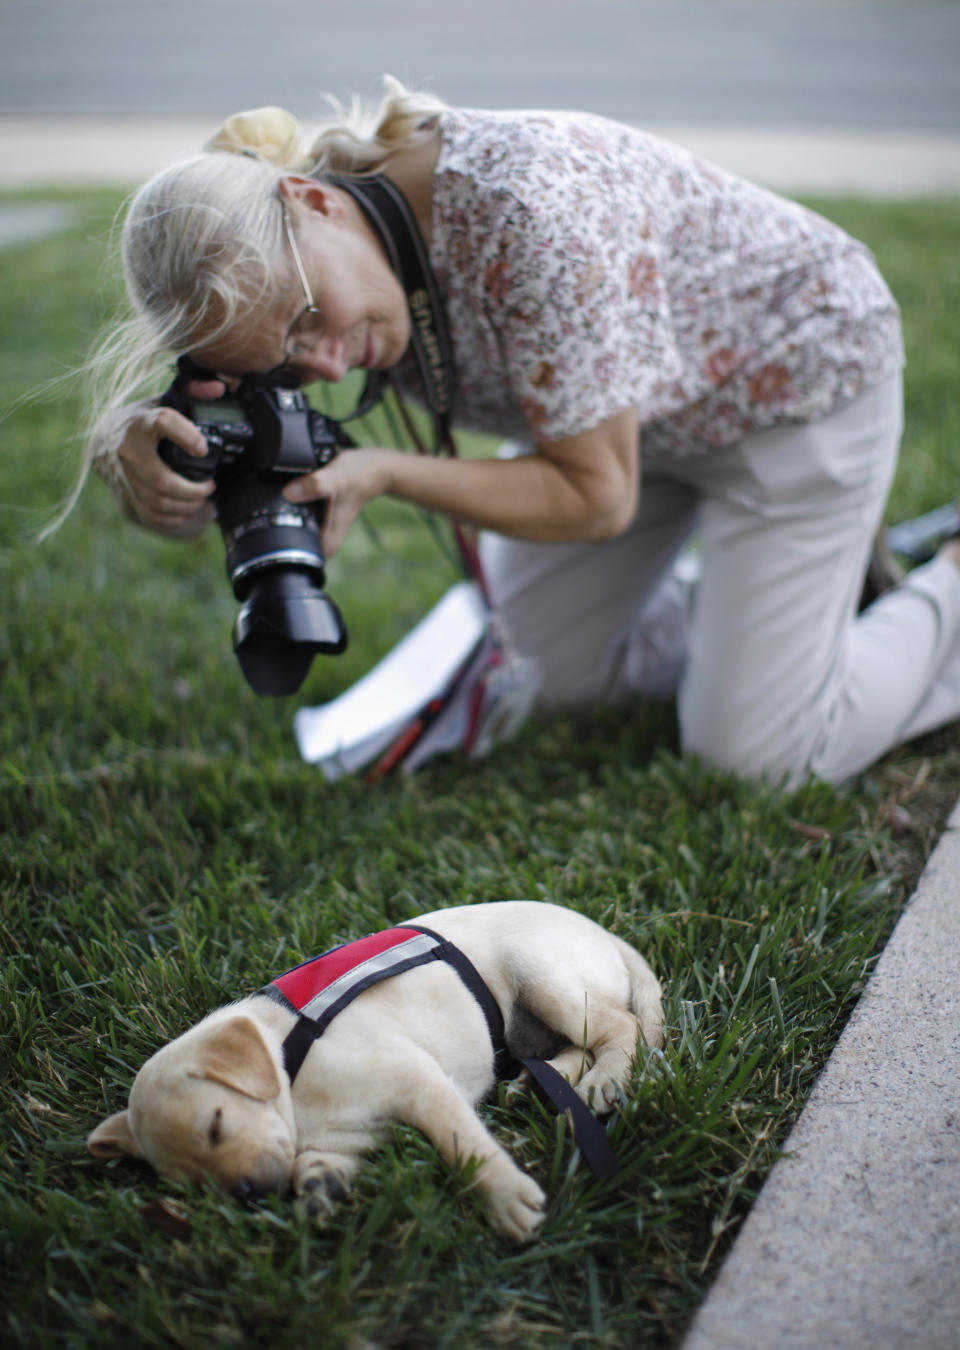 A photographer takes a picture of a sleeping labrador puppy "Hoey", named in honor of September 11, 2001 attack victim Patrick Hoey who died in the World Trade Center, in this picture taken on the grounds of the Pentagon near Washington, June 28, 2011. Hoey is part of the Transportation and Security Administration (TSA)'s Puppy Program where young dogs are raised to be used as future bomb sniffers at air cargo facilities nationwide. The tenth anniversary of the September 11, 2001 attacks will be commemorated this year. (REUTERS/Jason Reed)